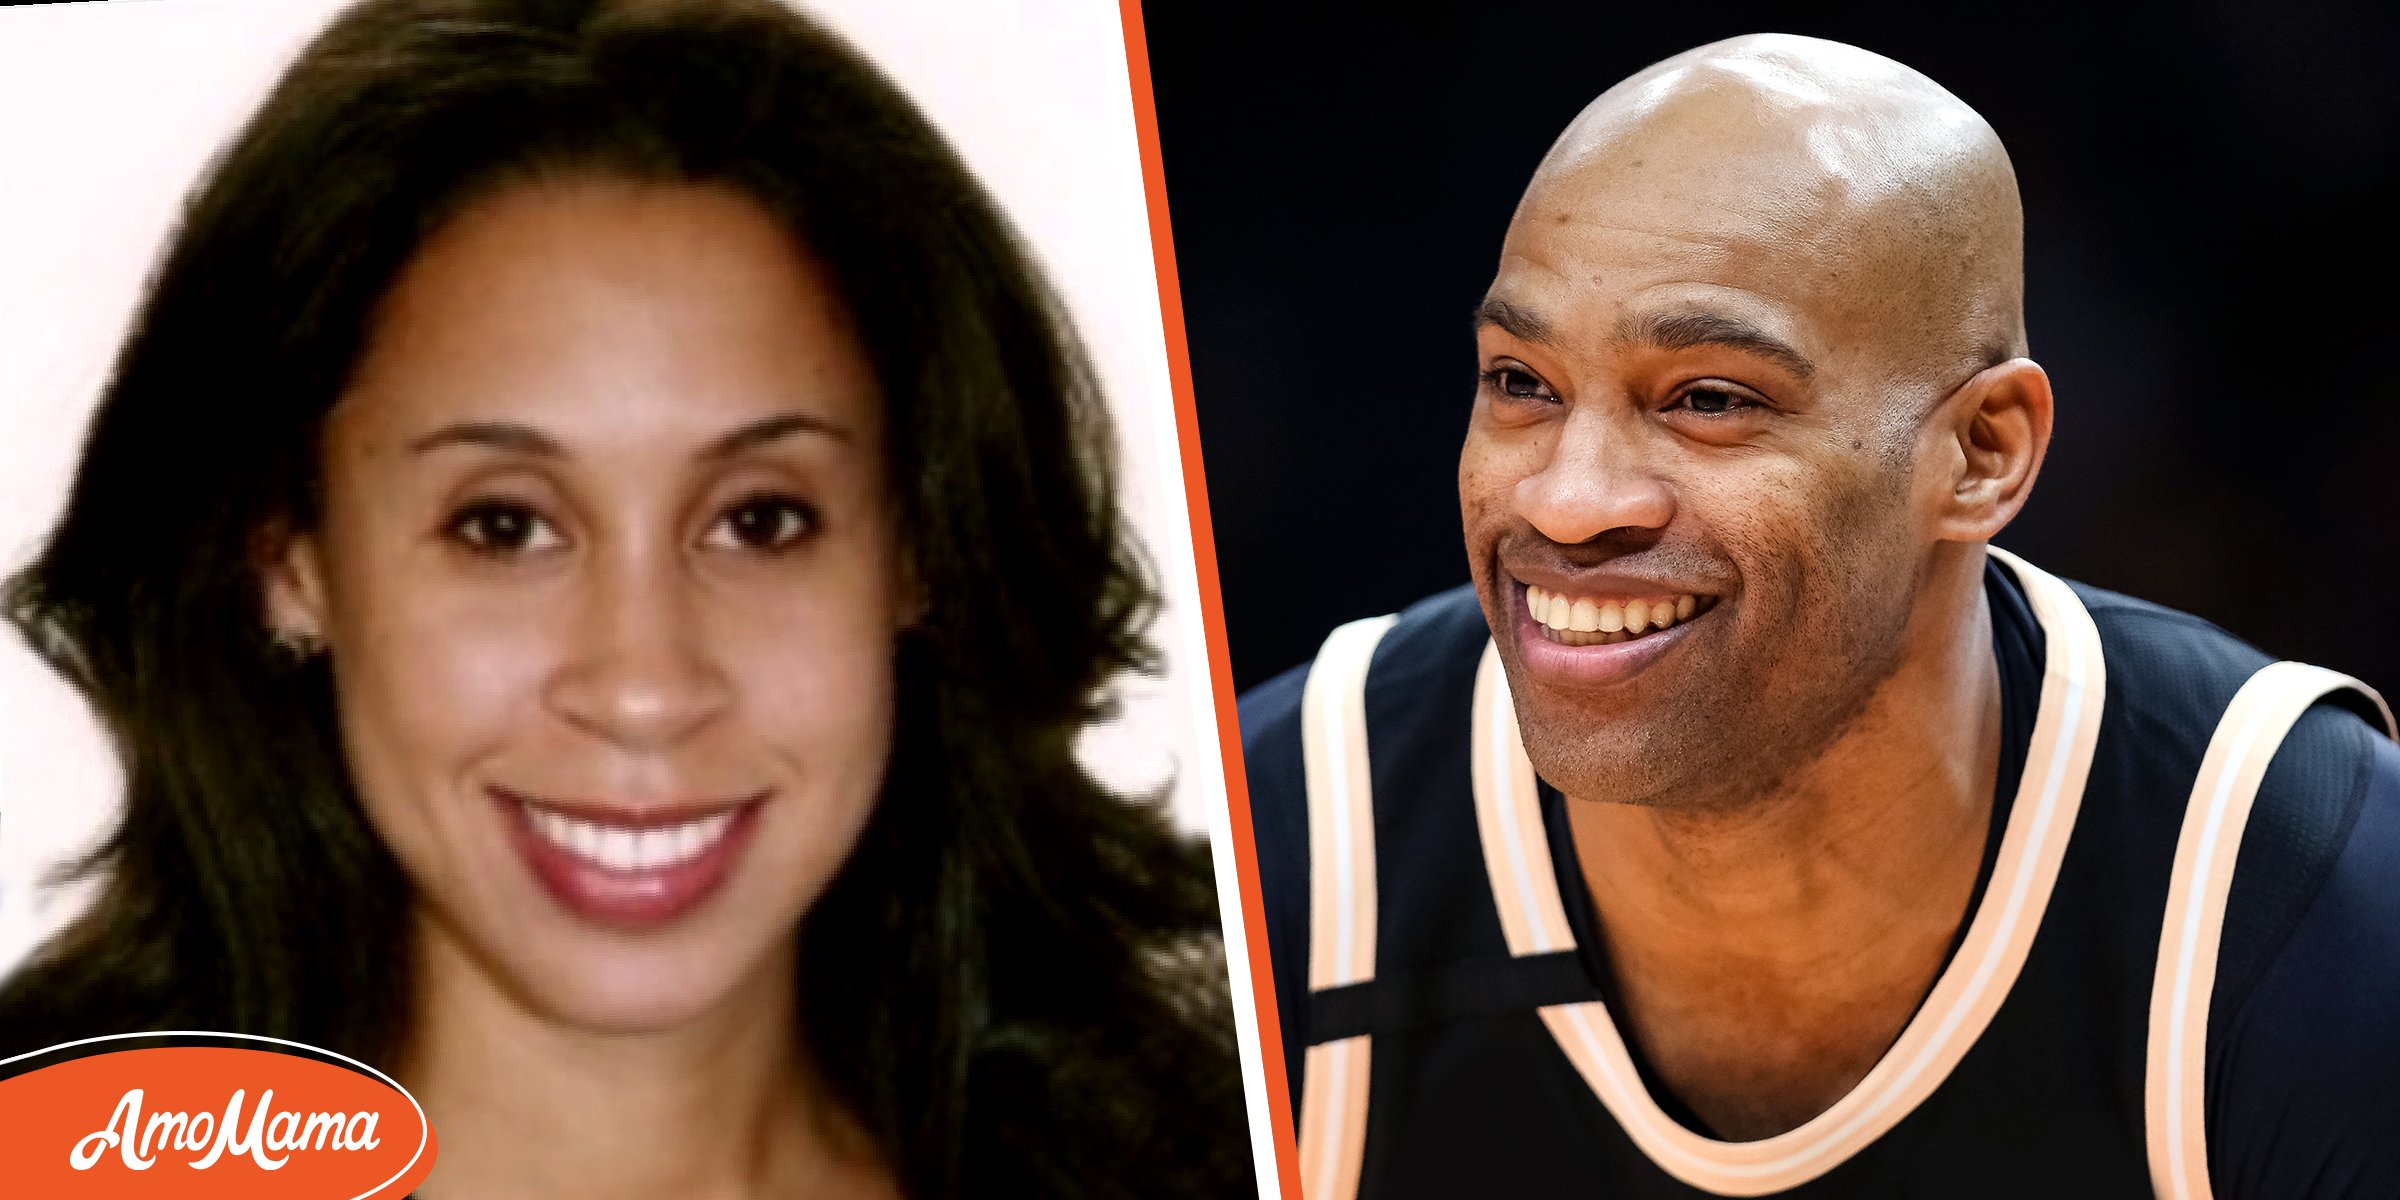 Sondi Carter, Vince Carter’s wife, was a competitive gymnast and is now an elite trainer: Inside their family